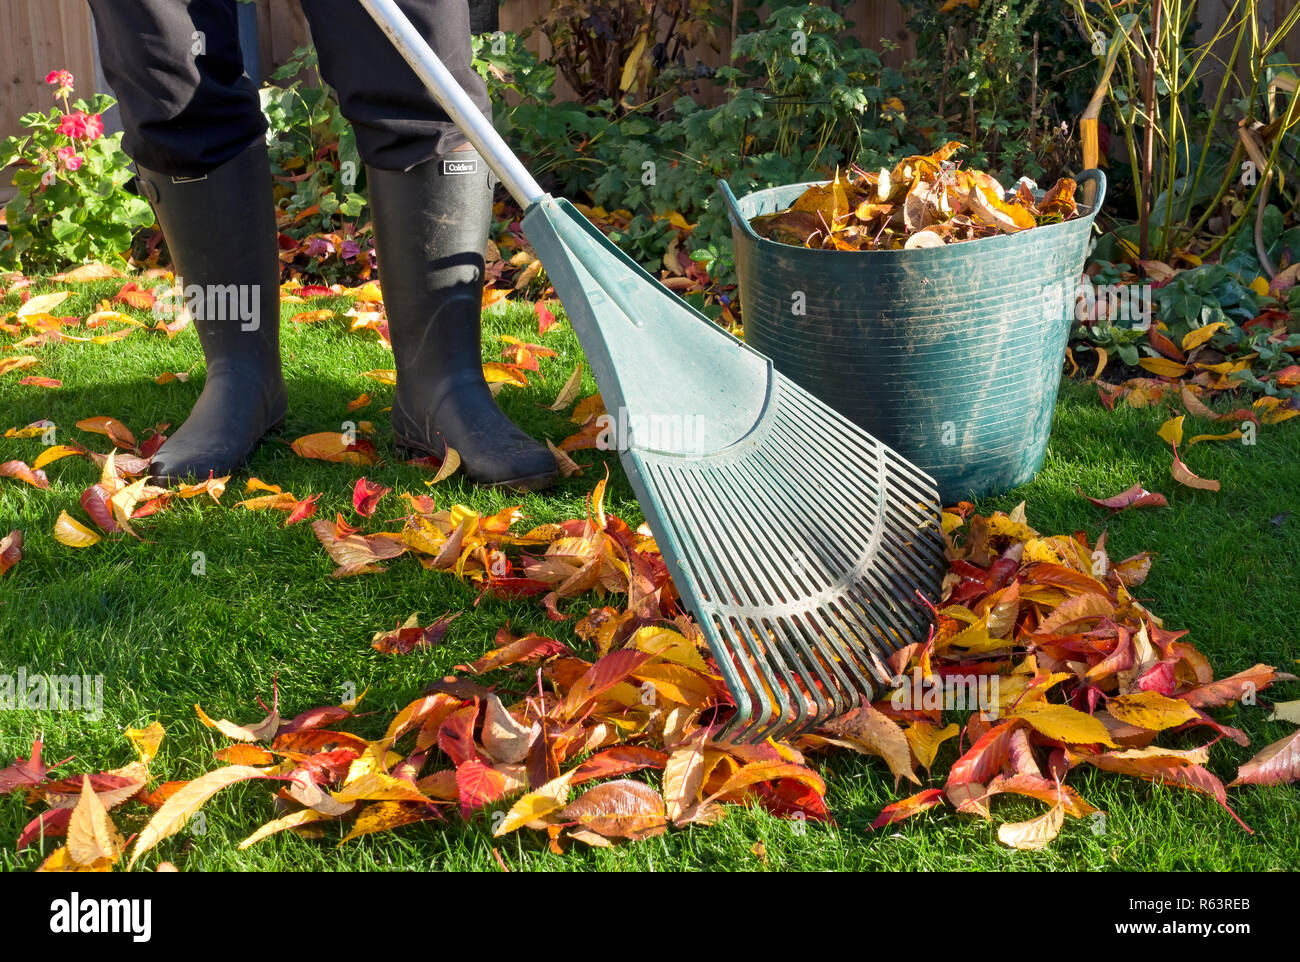 Close up of person man gardener man collecting raking sweeping fallen leaves on grass garden lawn in autumn England UK United Kingdom GB Great Britain Stock Photo